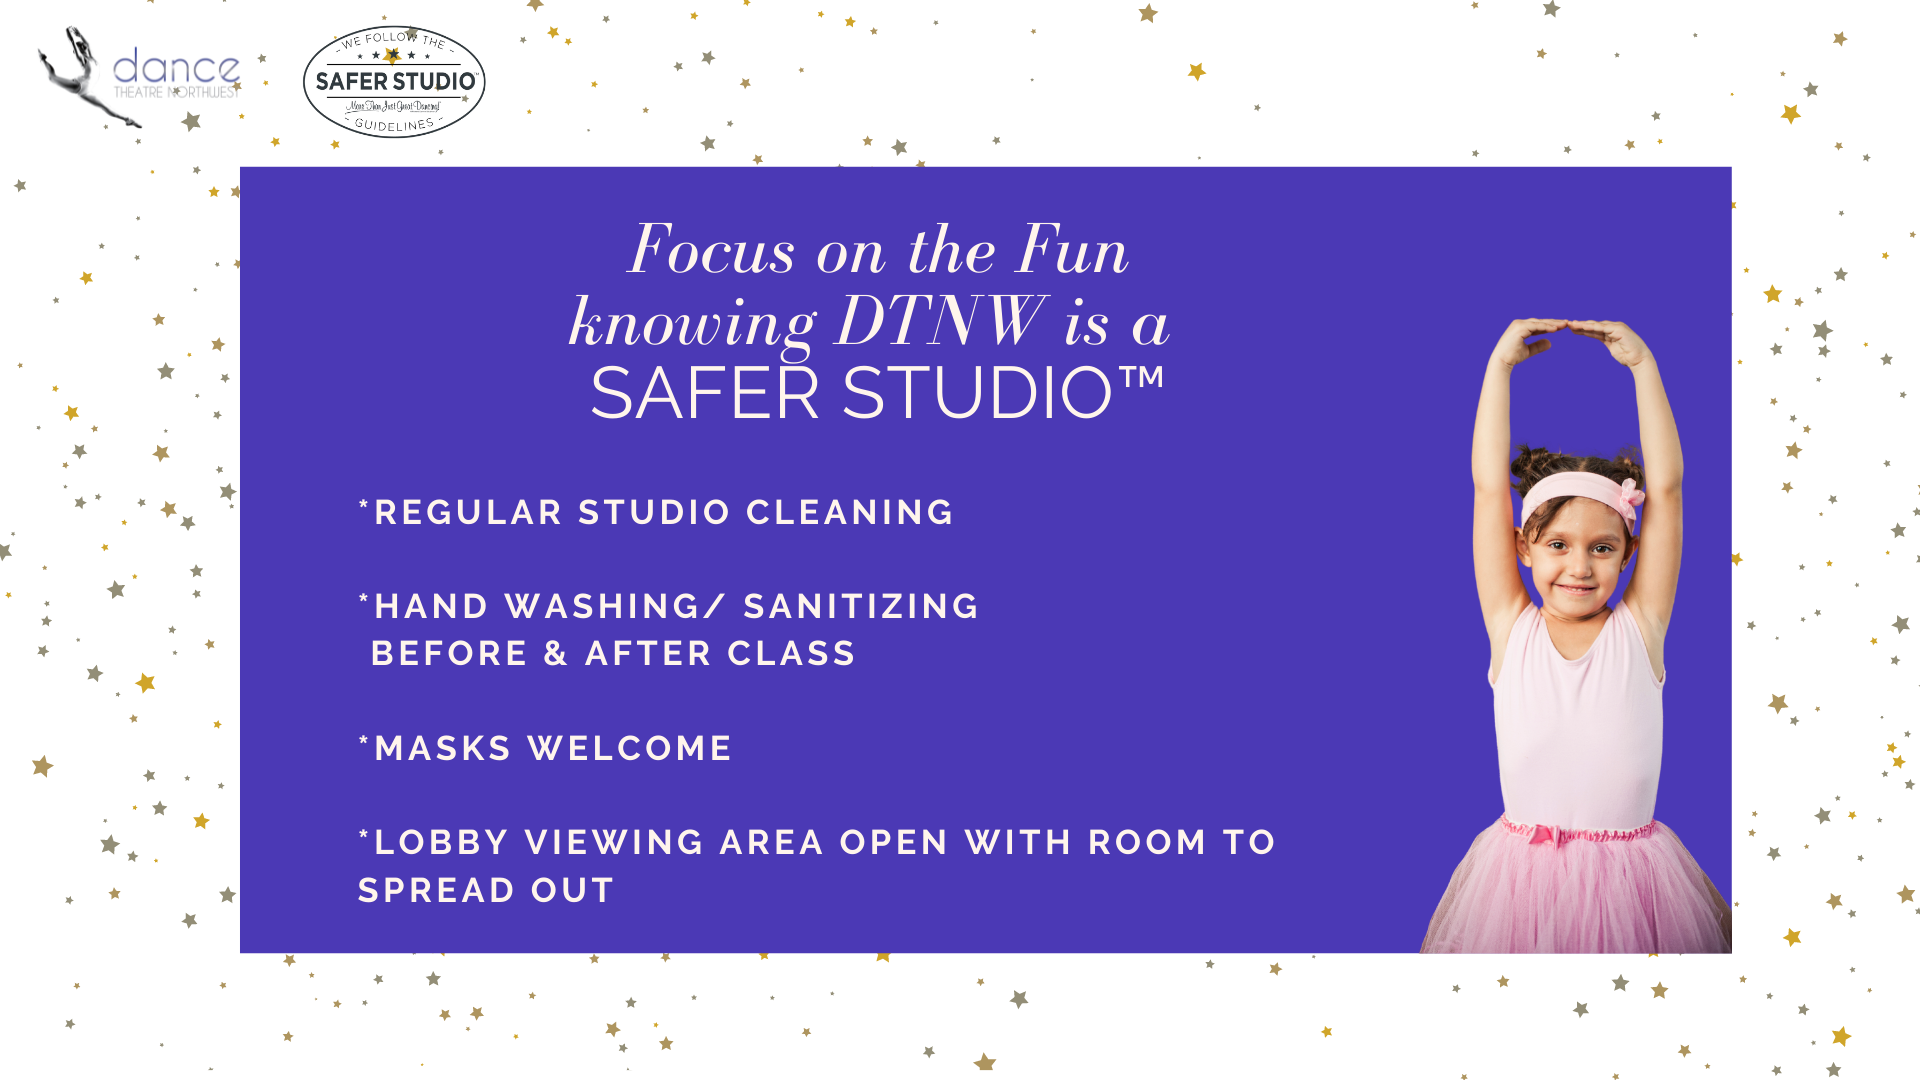 Dance Theatre Northwest is a Safer Studio Dtnw is a safer studio. Our lobby is now open! View our policies and steps we take to keep your family safe this year.